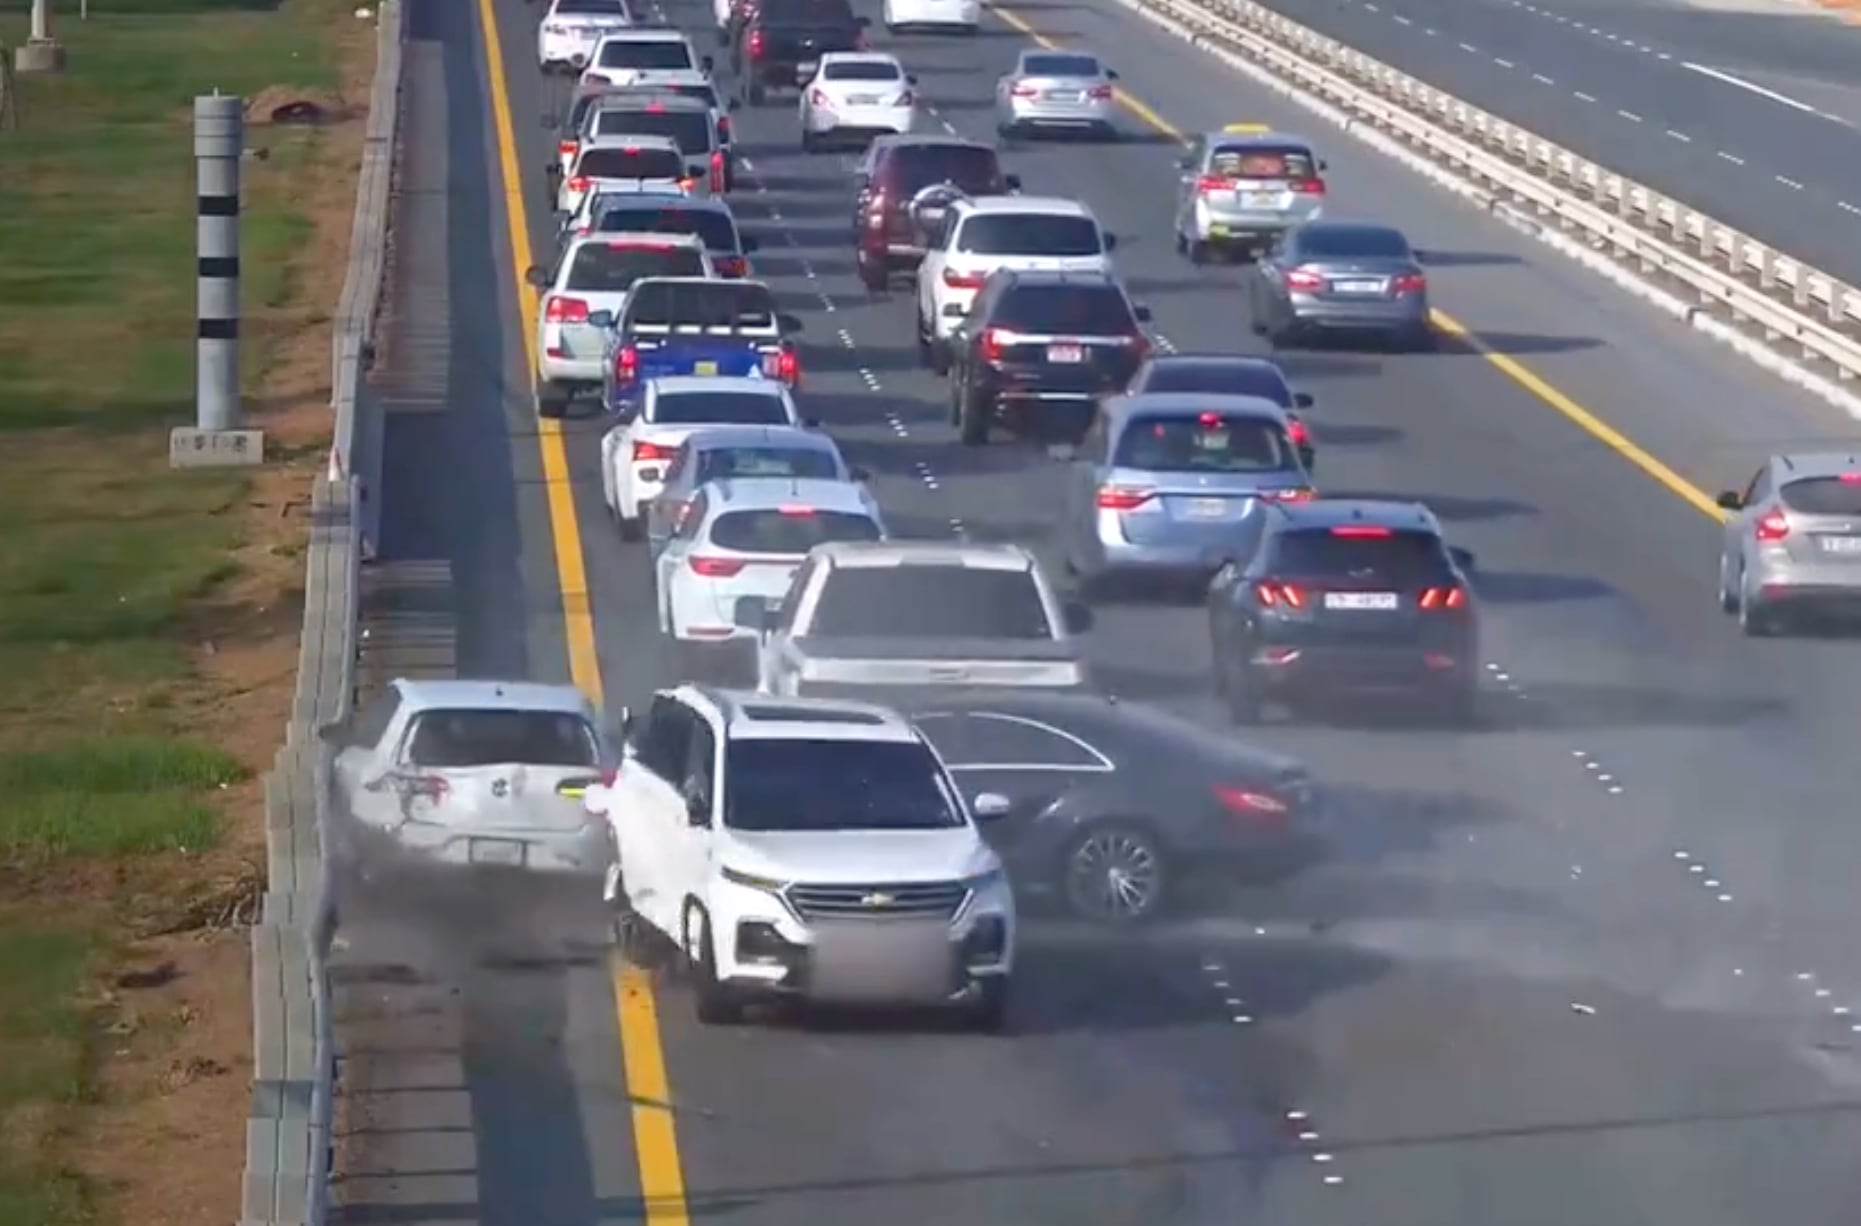 abu dhabi police release crash footage to warn of dangers of distracted driving